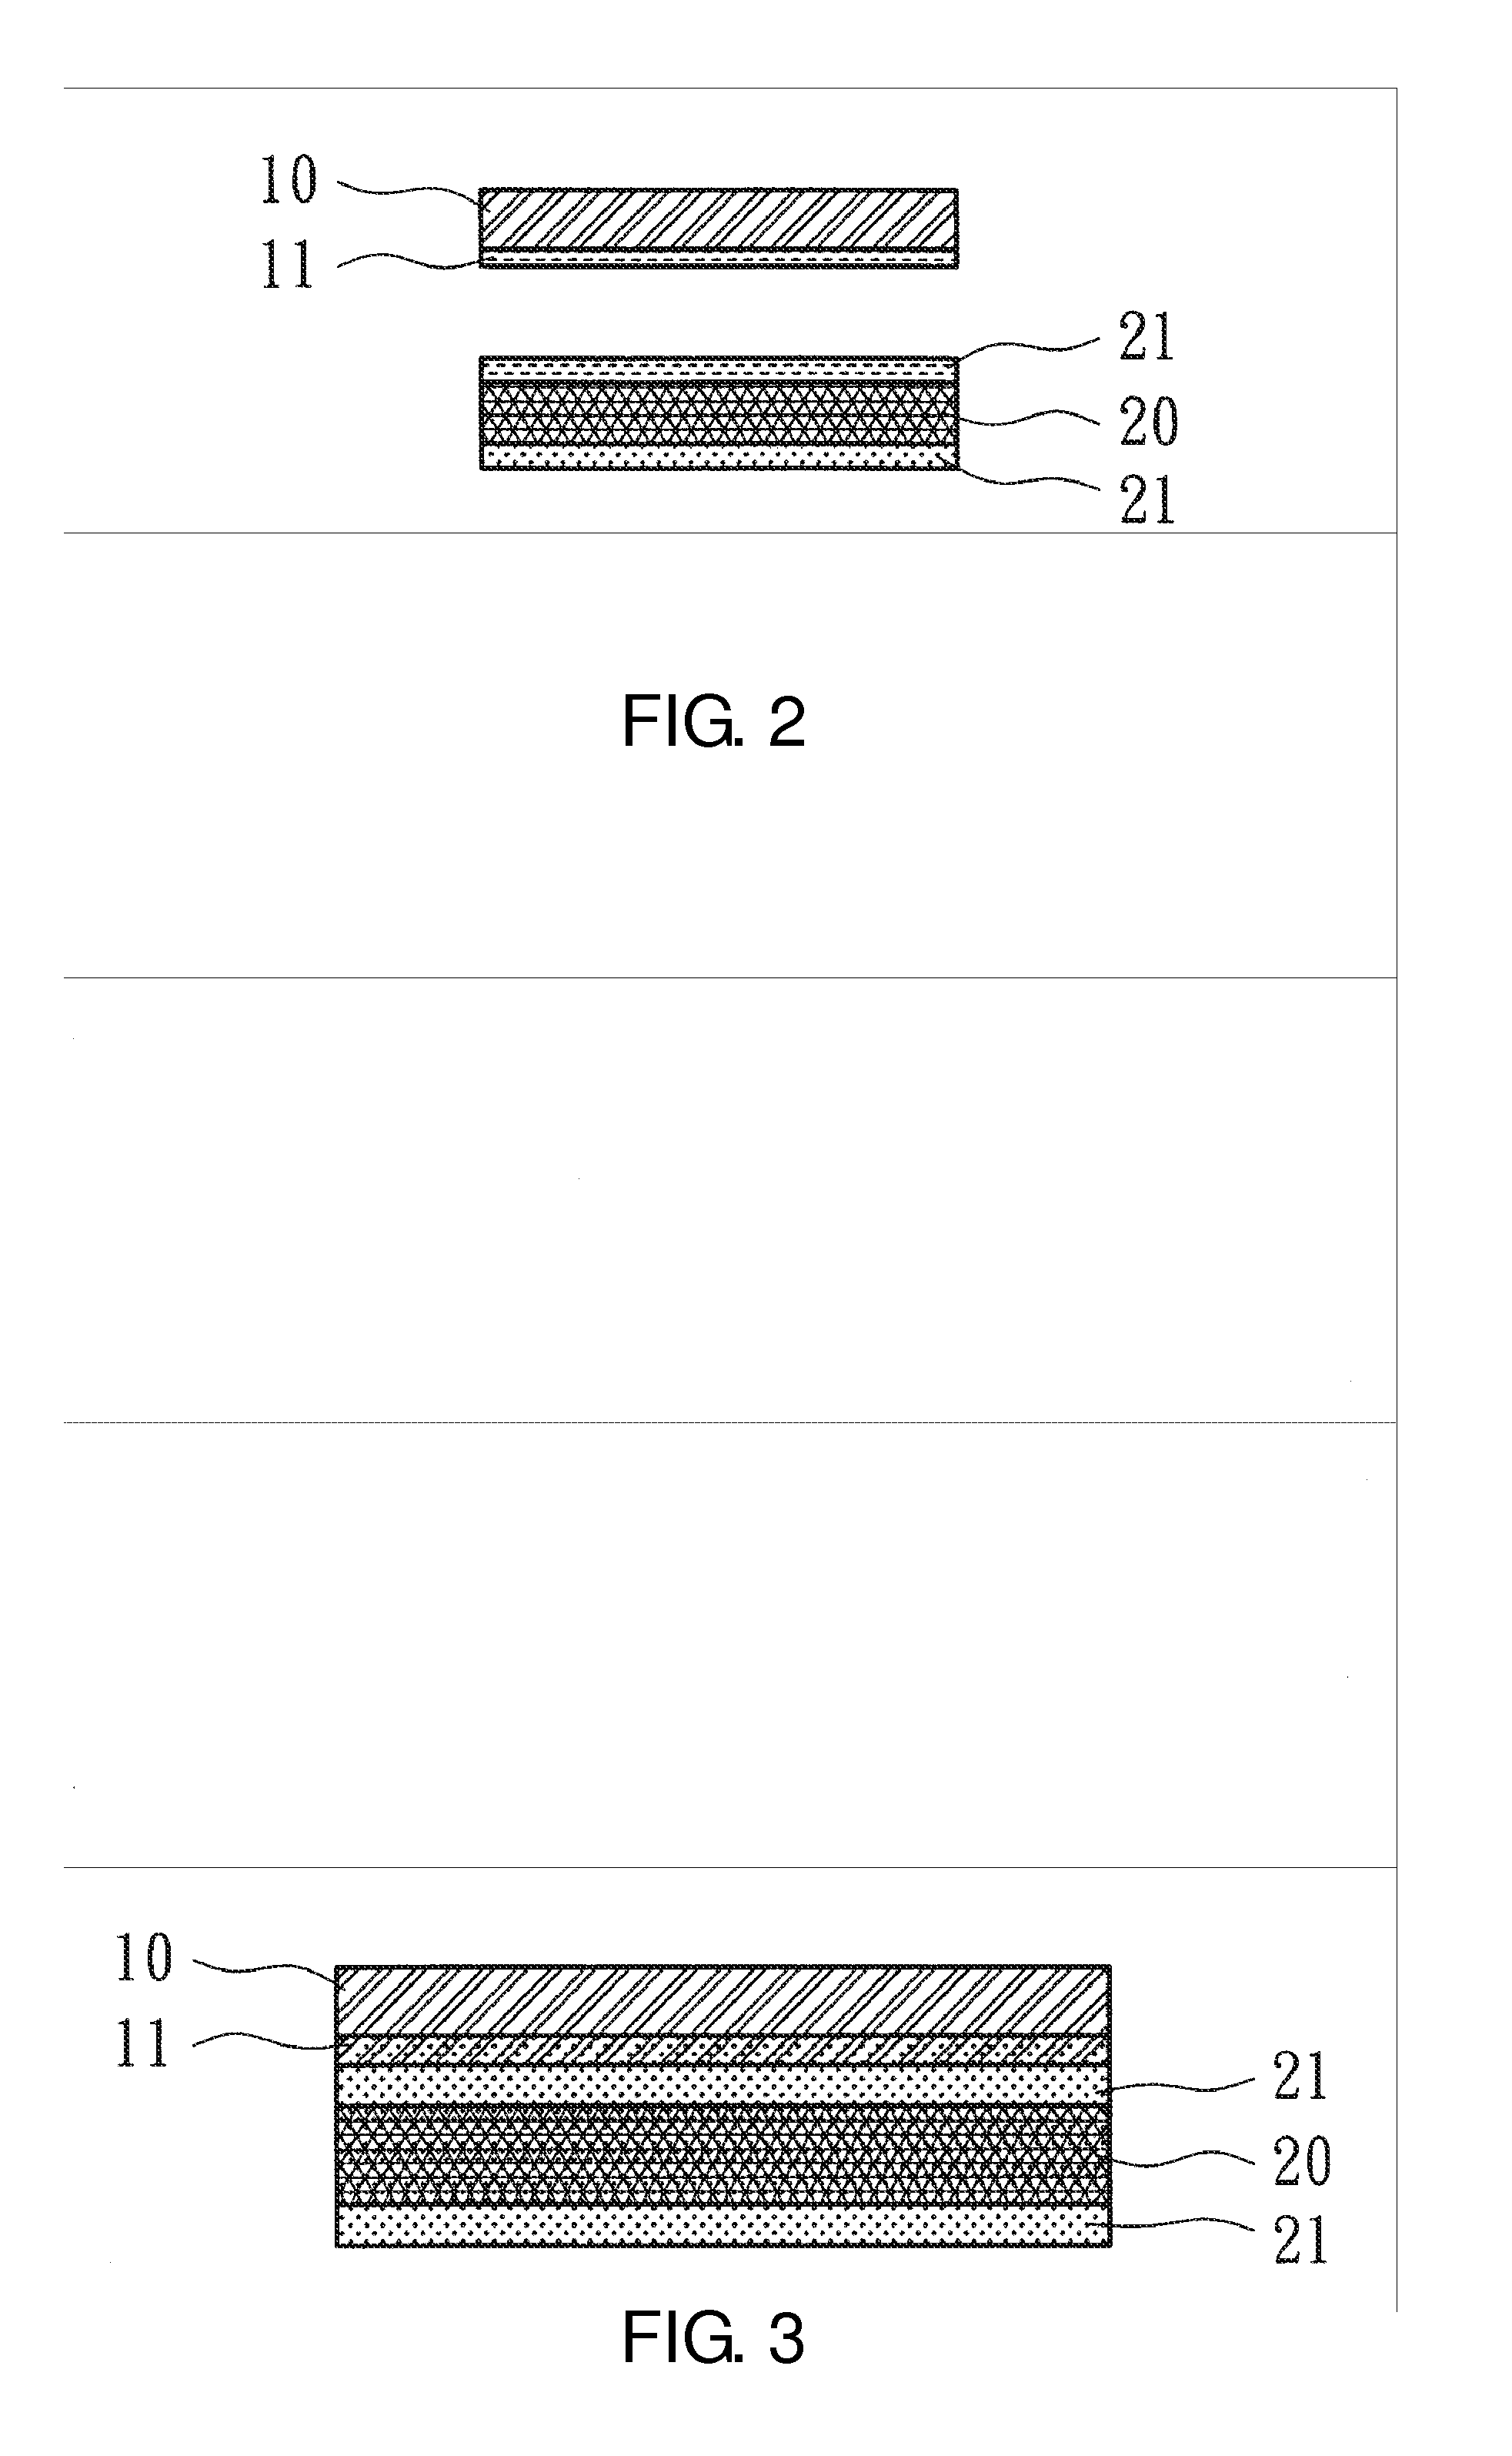 Fibrous article with fabric-like surface and process of manufacturing same